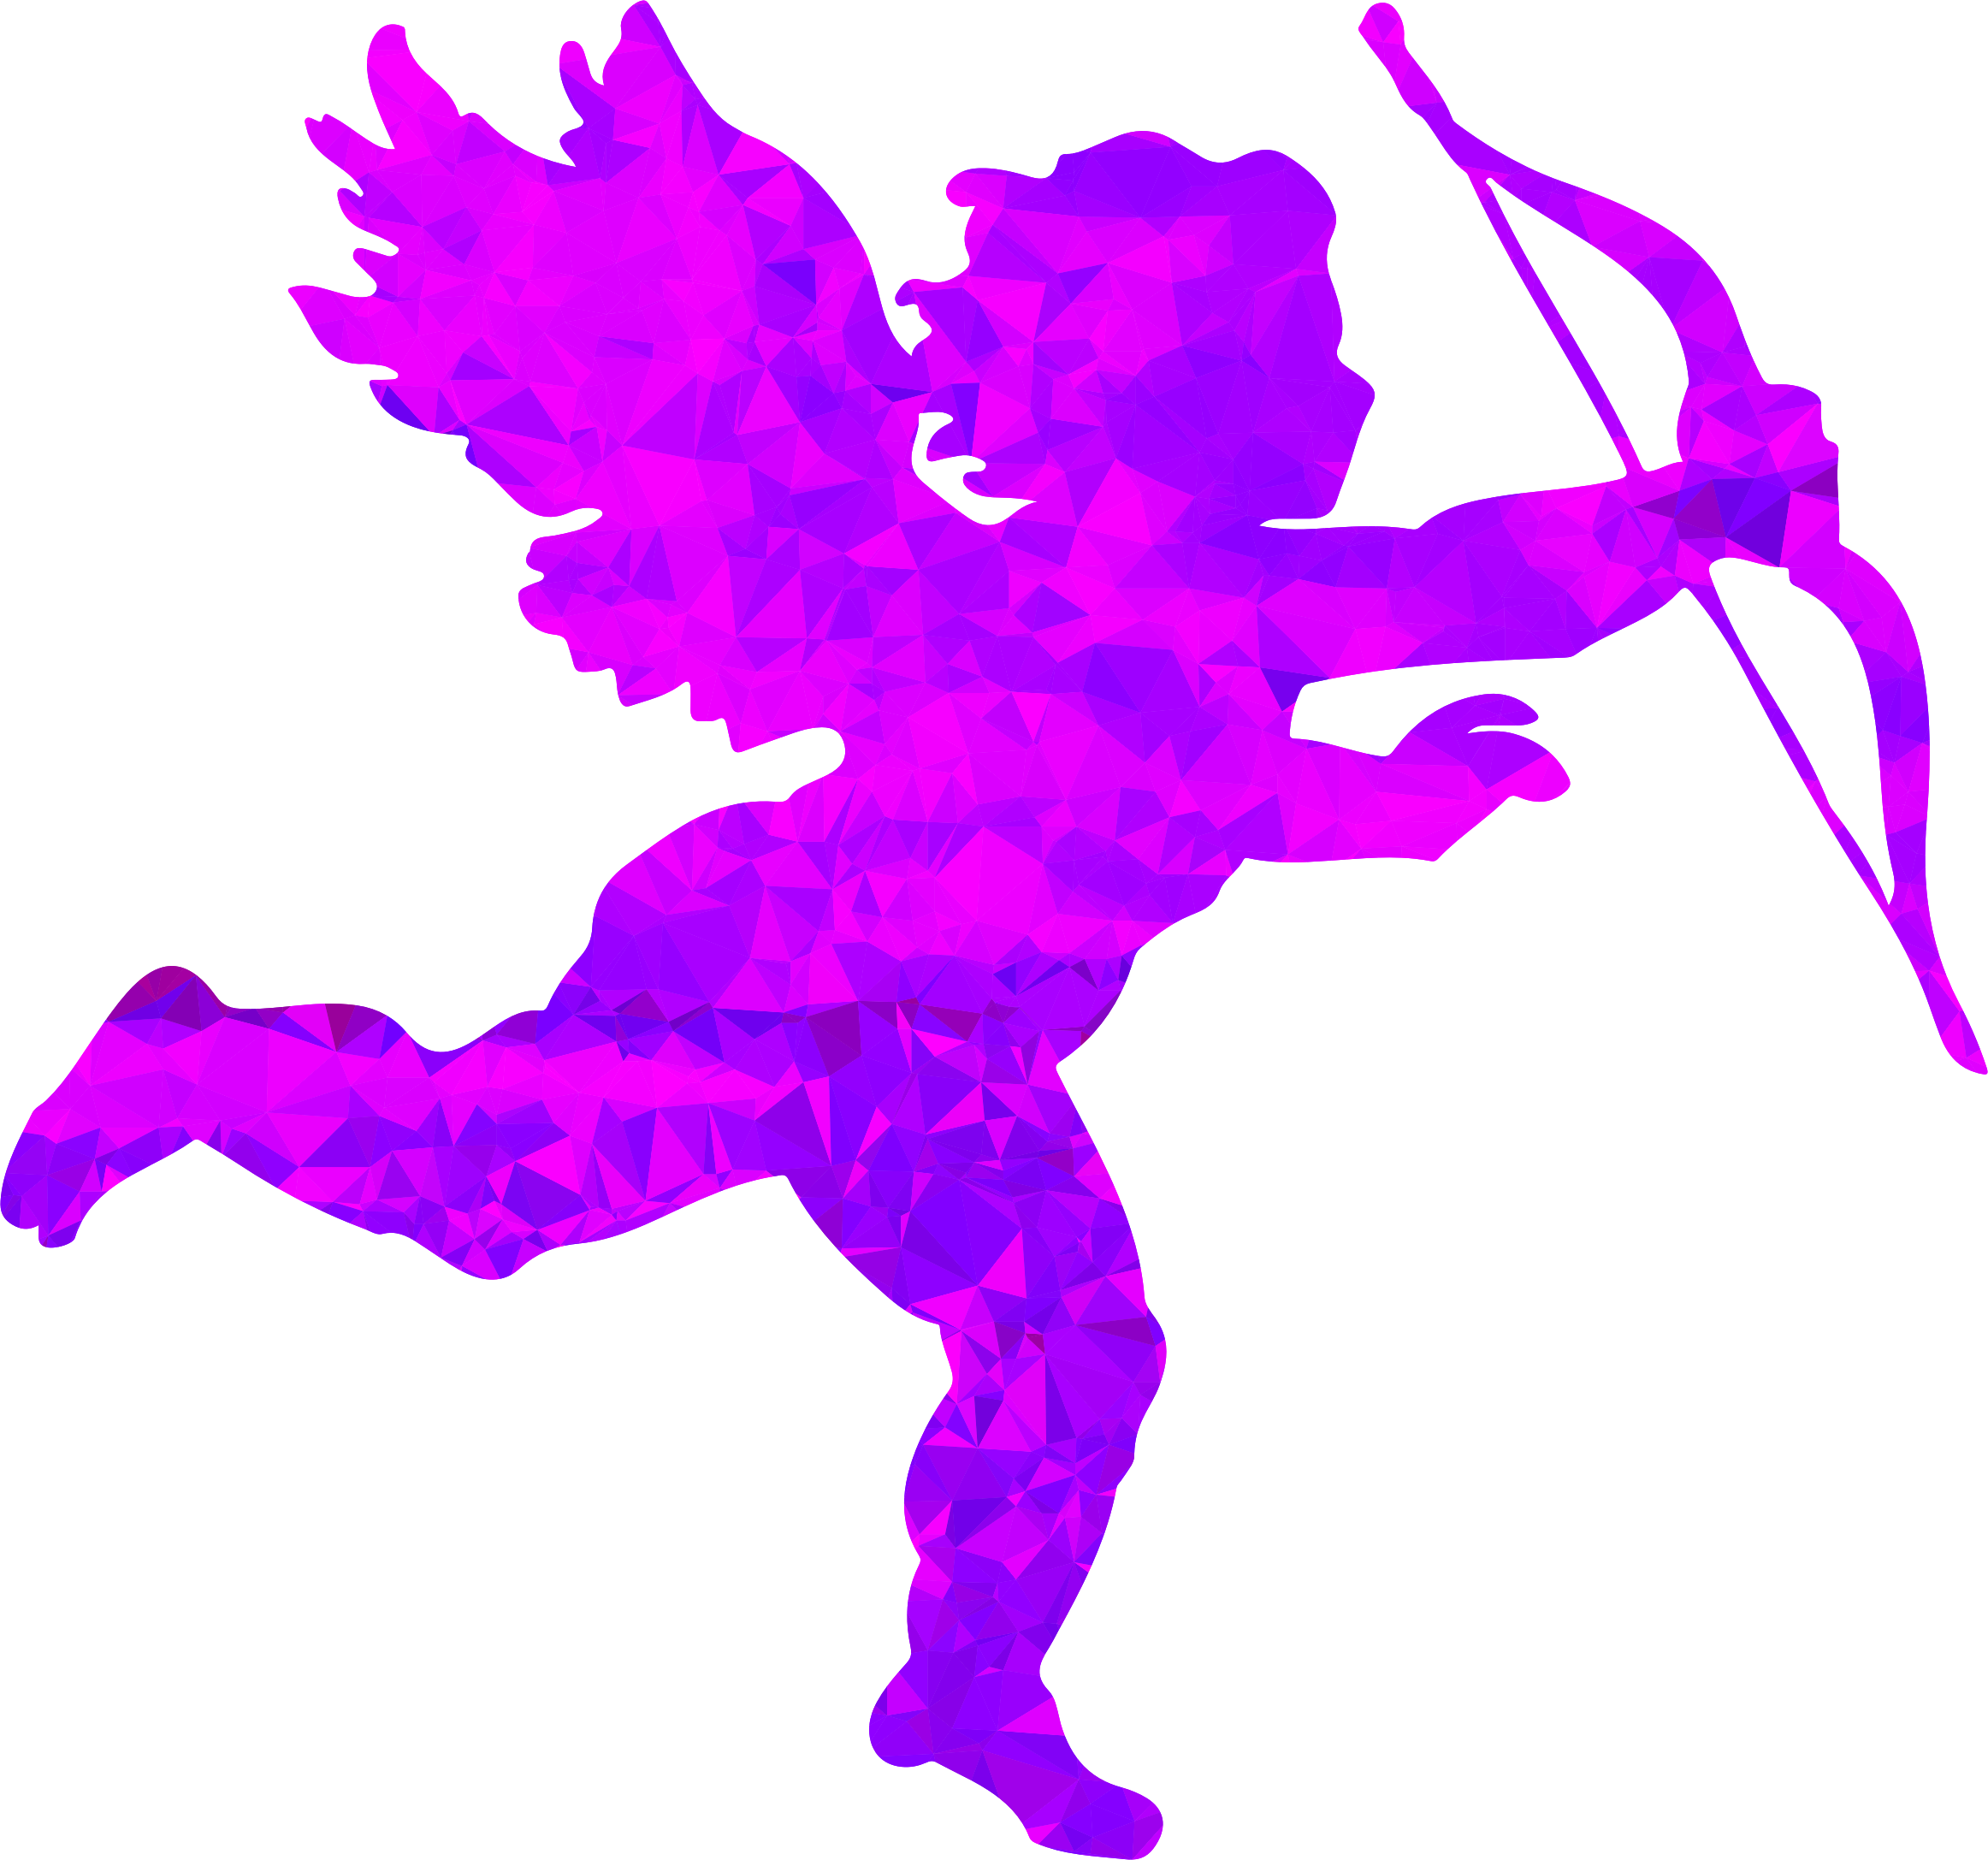 This Free Icons Png Design Of Amethyst Cupid - This Free Icons Png Design Of Amethyst Cupid (2324x2174)